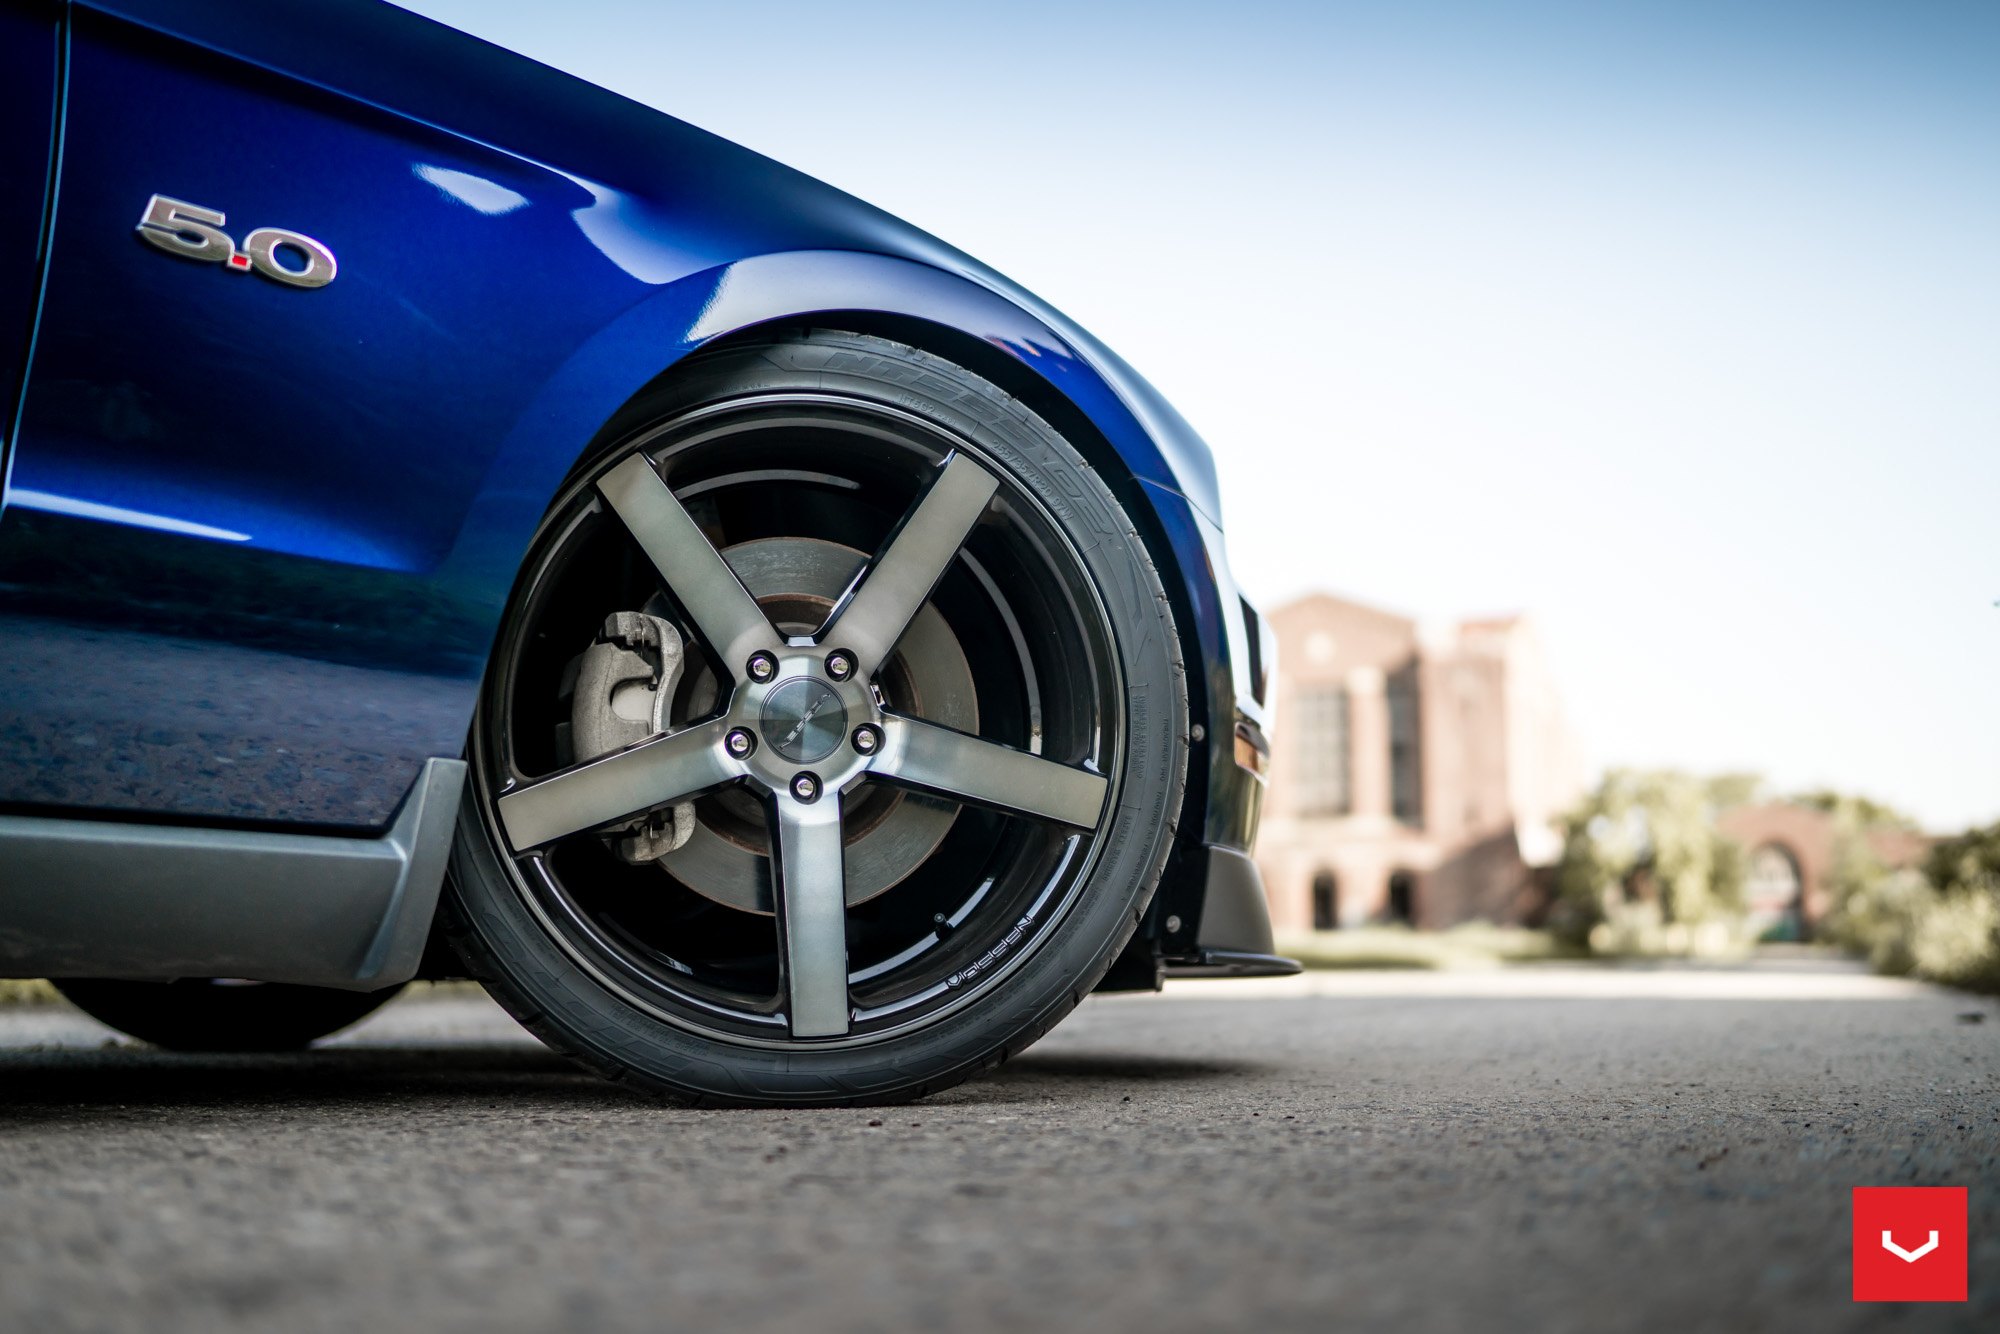 Tinted Gloss Black Vossen Rims on Blue Ford Mustang - Photo by Vossen